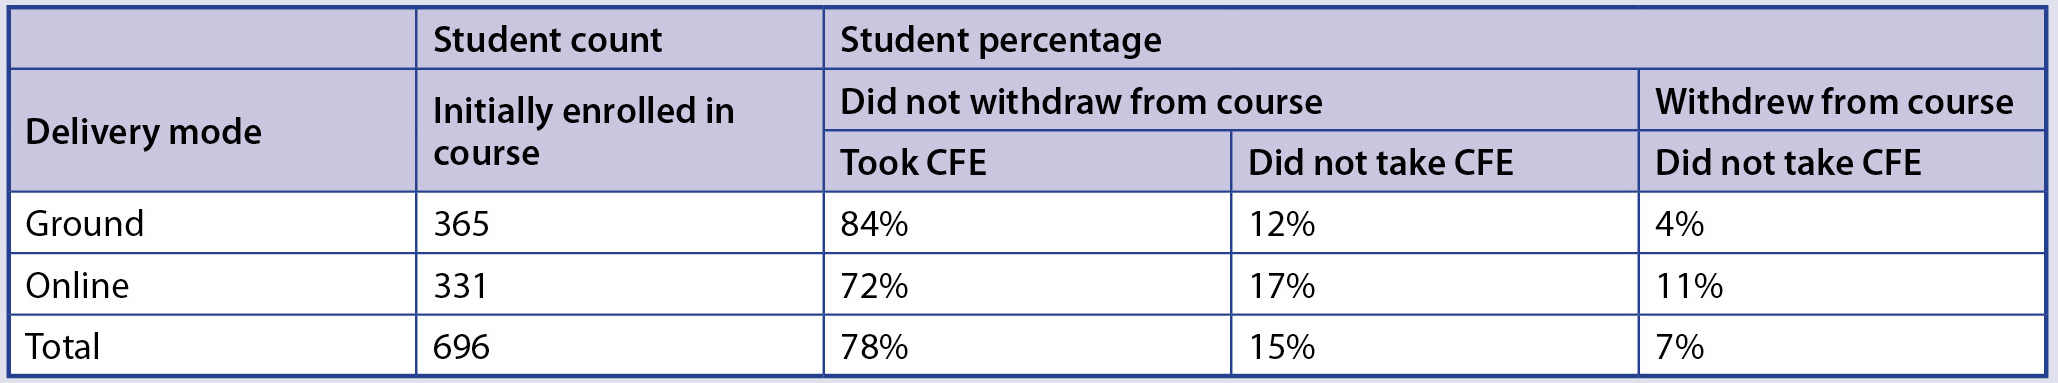 TABLE 6 Summary of CFE student participation and course withdrawal in ground and online sections.